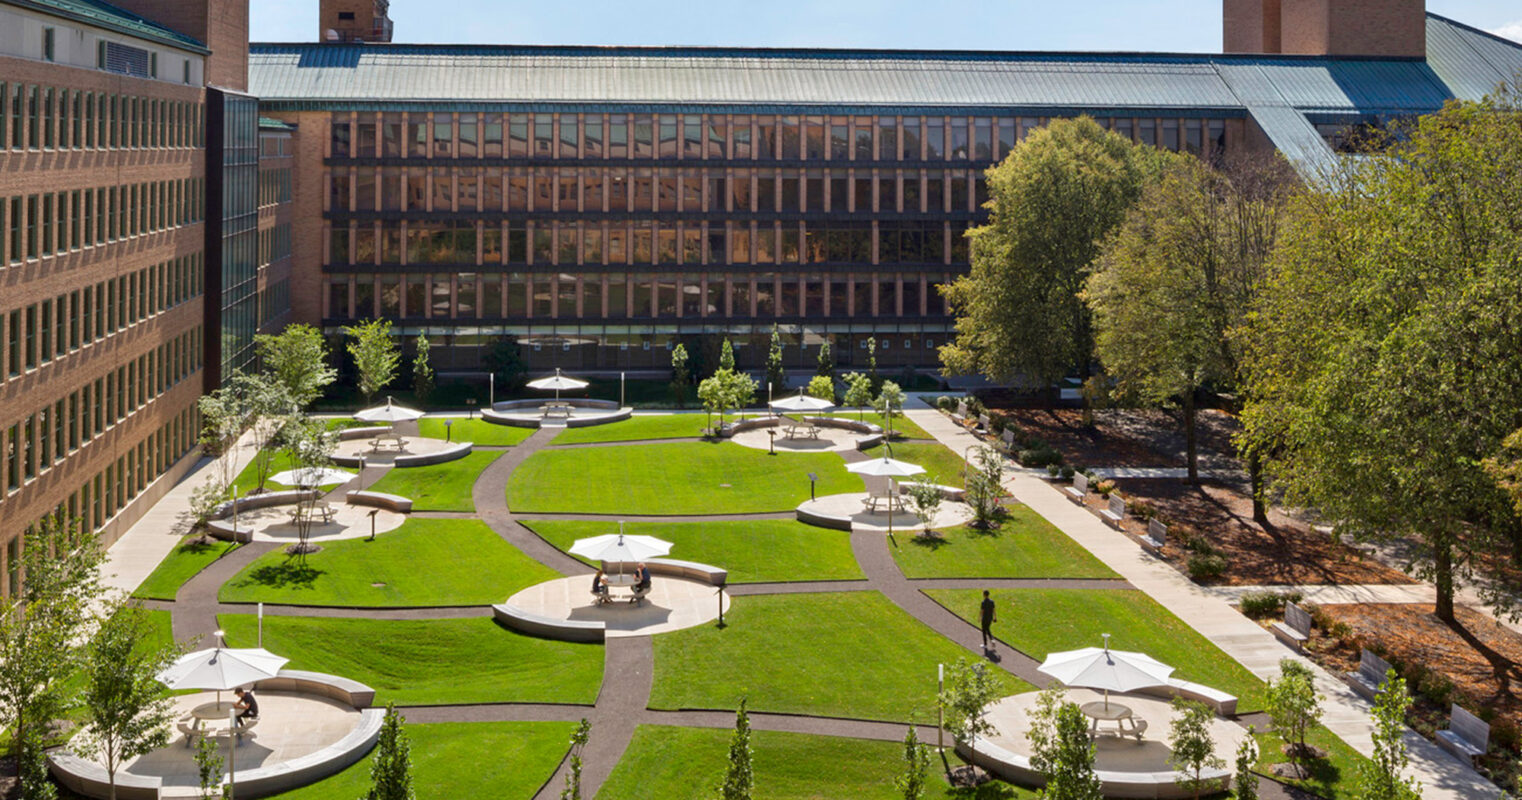 An urban oasis: verdant gardens and circular seating areas offer a peaceful retreat amidst modern brick buildings.